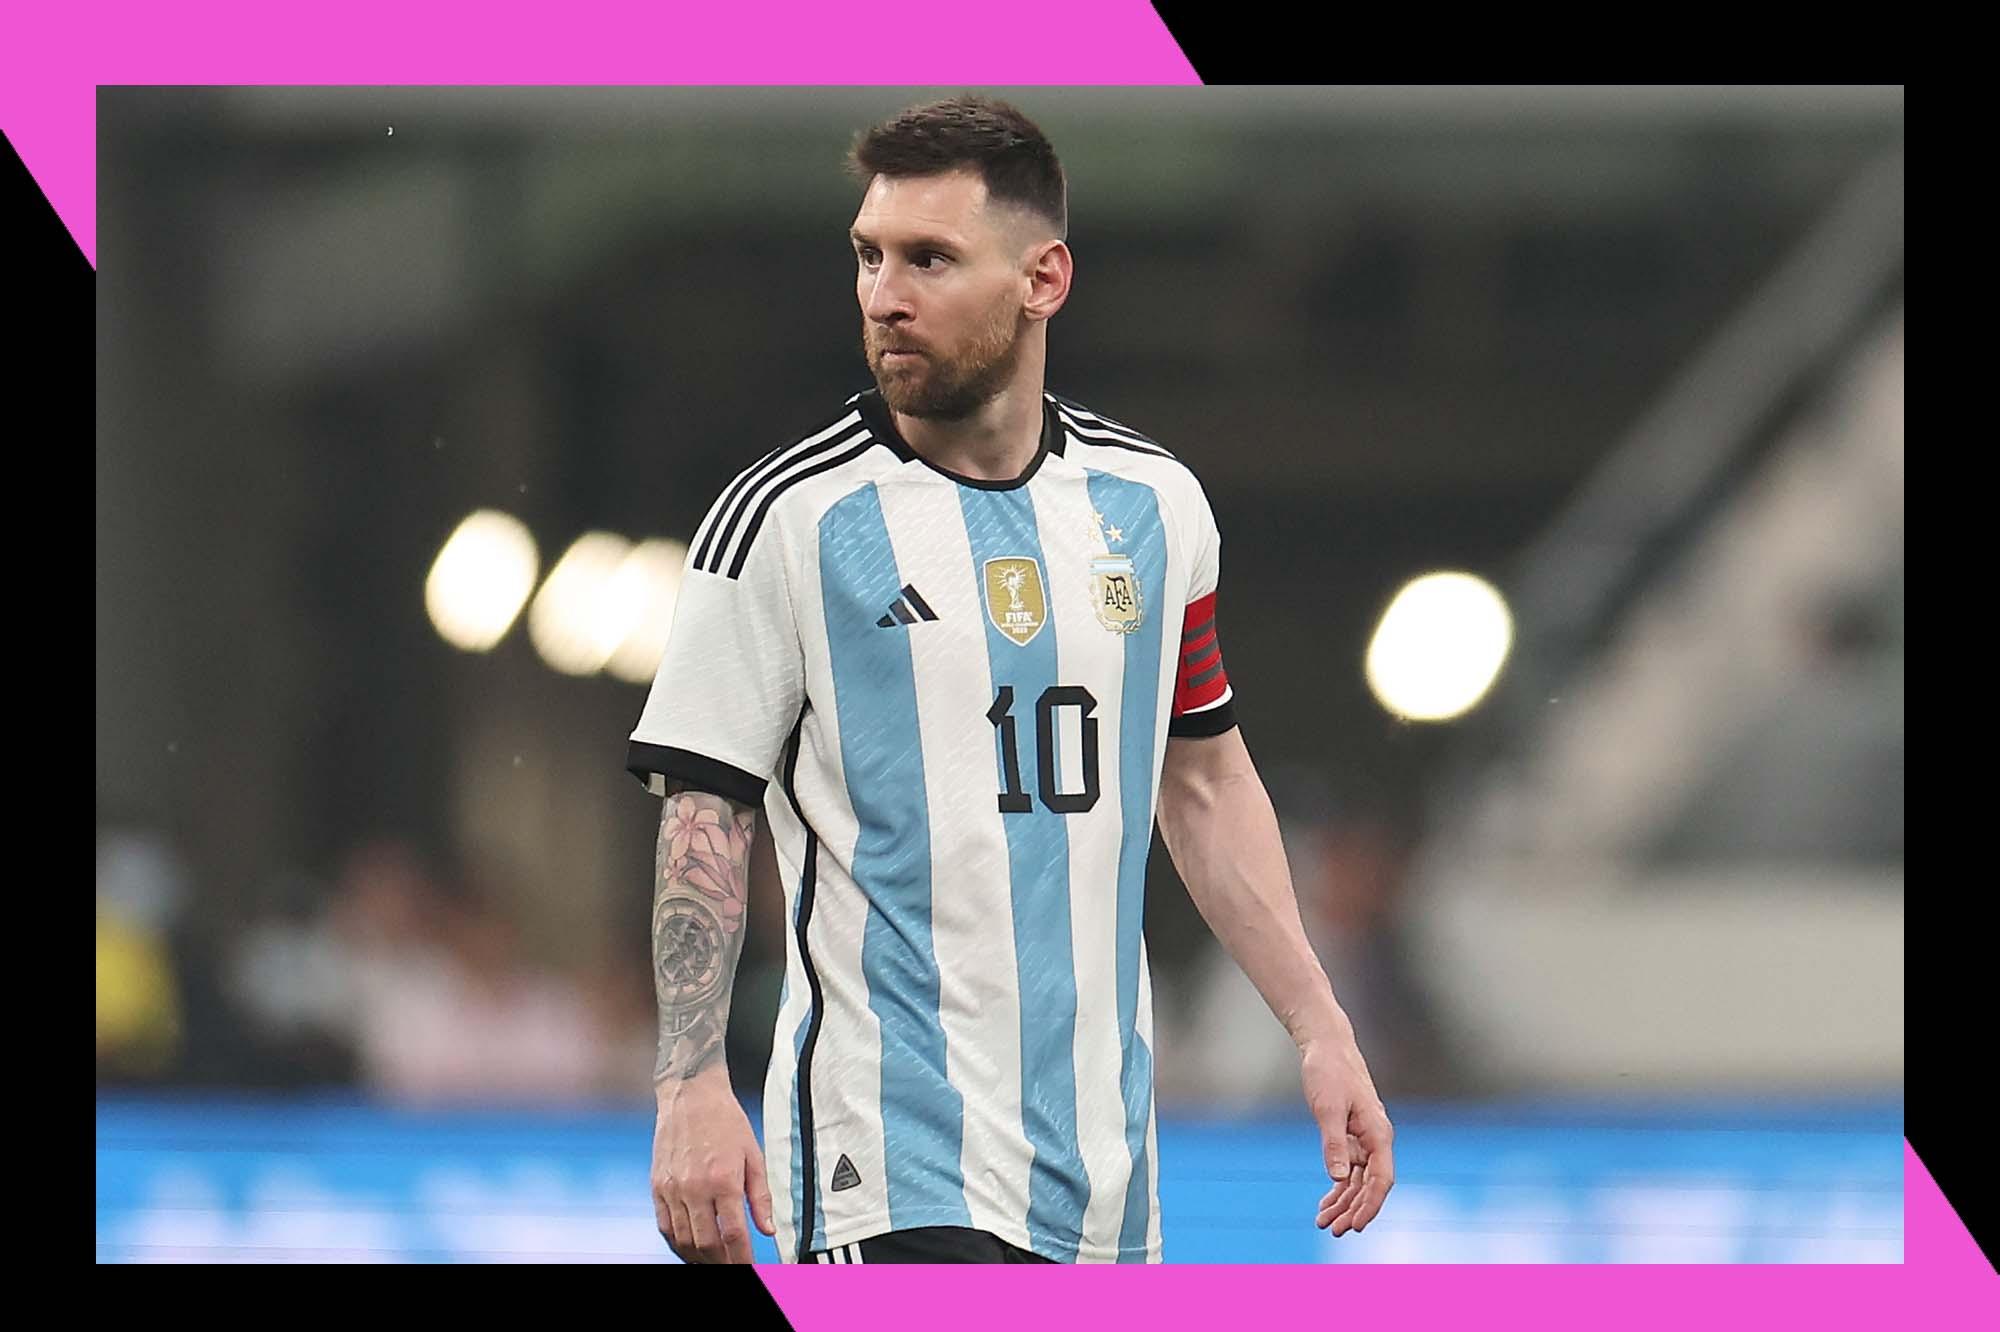 Messi Mls Debut Tickets Prices Are Dropping Buy Now